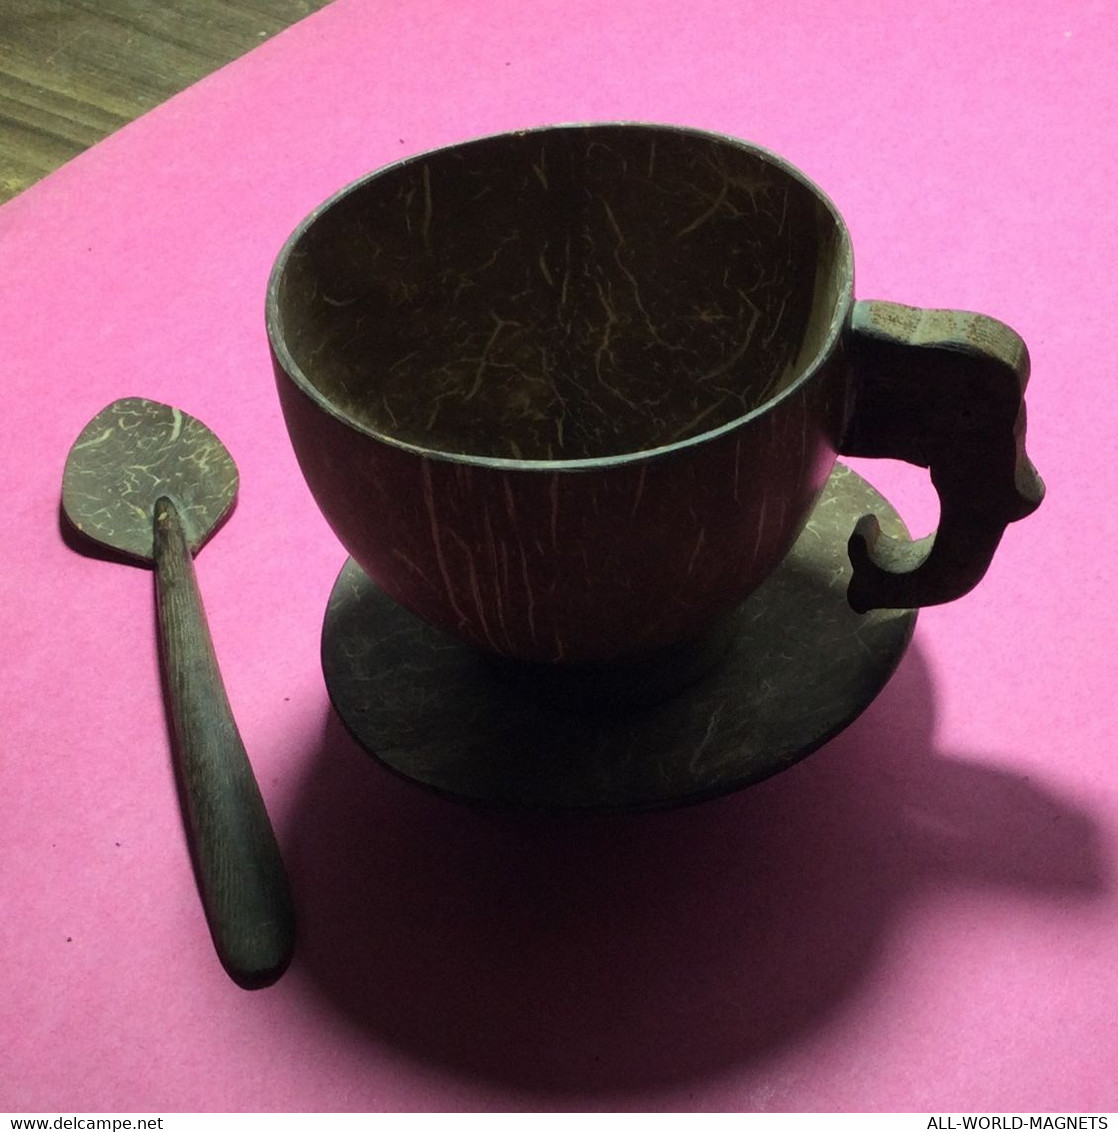 Lot of Handmade Decorative Coffe/tee Cup Saucer Spoon, Coconut Shell, Mauritius